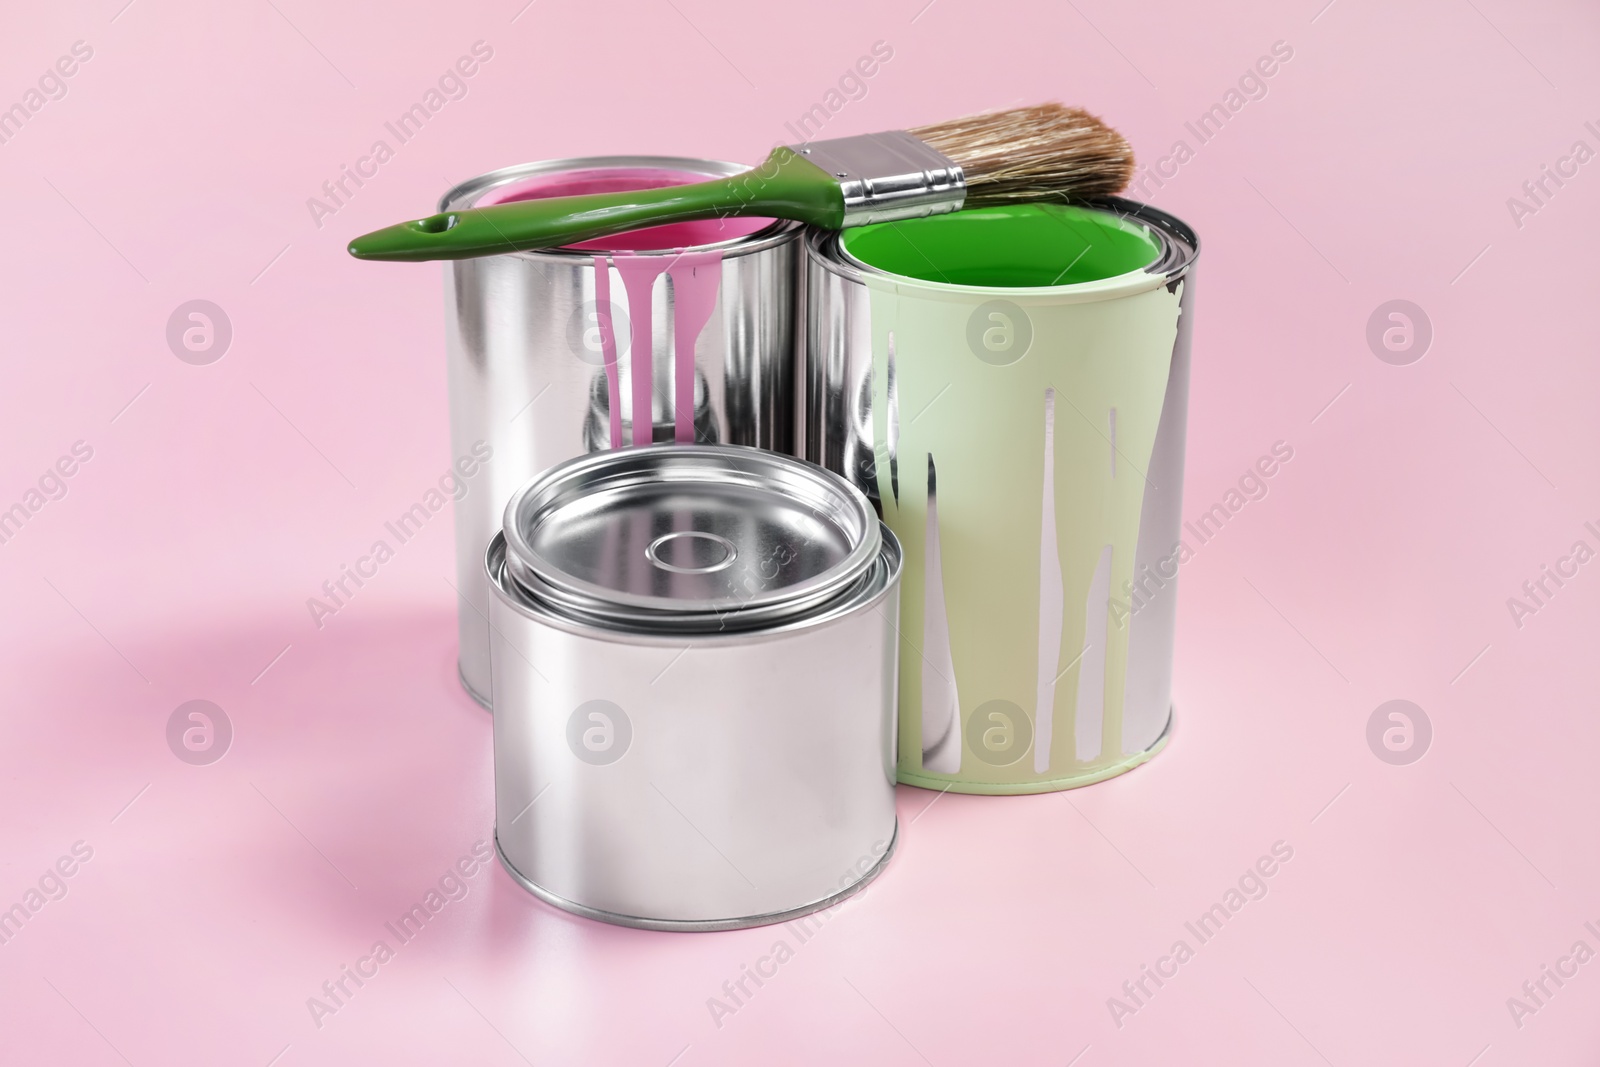 Photo of Cans of paints and brush on pink background